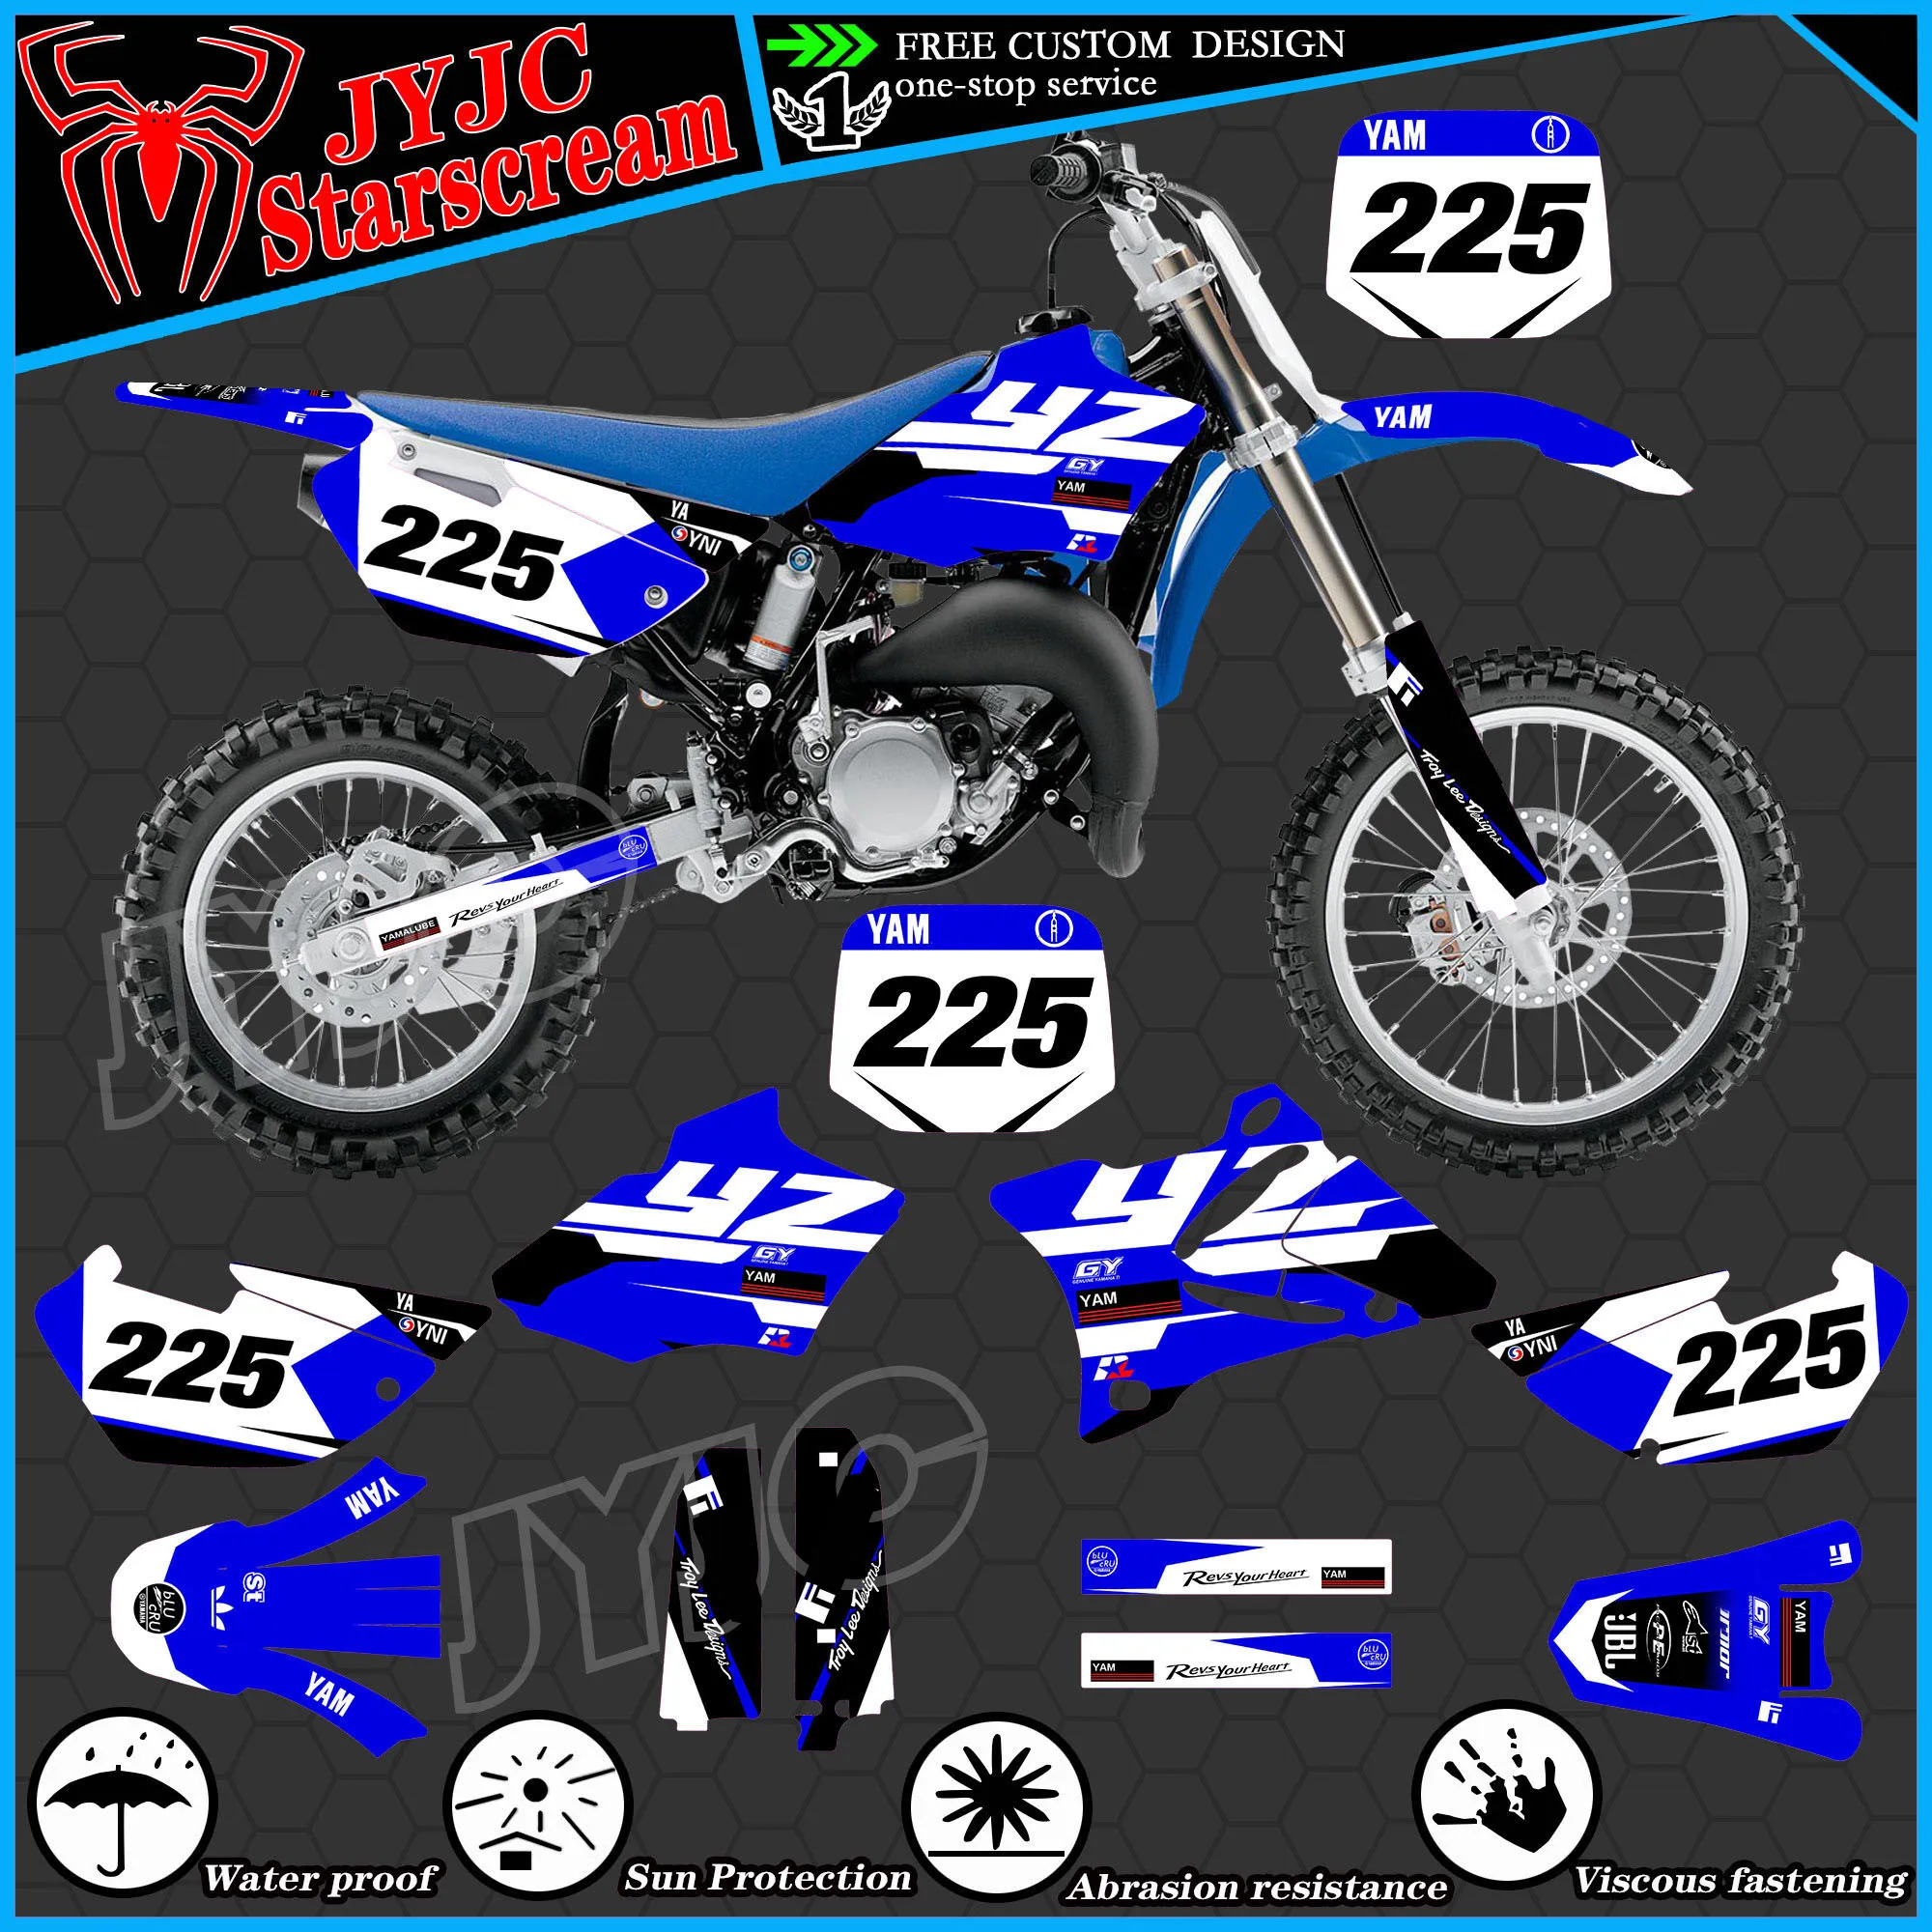 Graphic Kit for YAMAHA 2002 2003 2004 2005 2006 2007 2008 2009 2010 2011 2012 2013 2014 YZ85 Motorcycle Decal Stickers kigoauto flip key shell 3 button hu101 for ford focus 2003 2004 2006 2007 2008 2010 2012